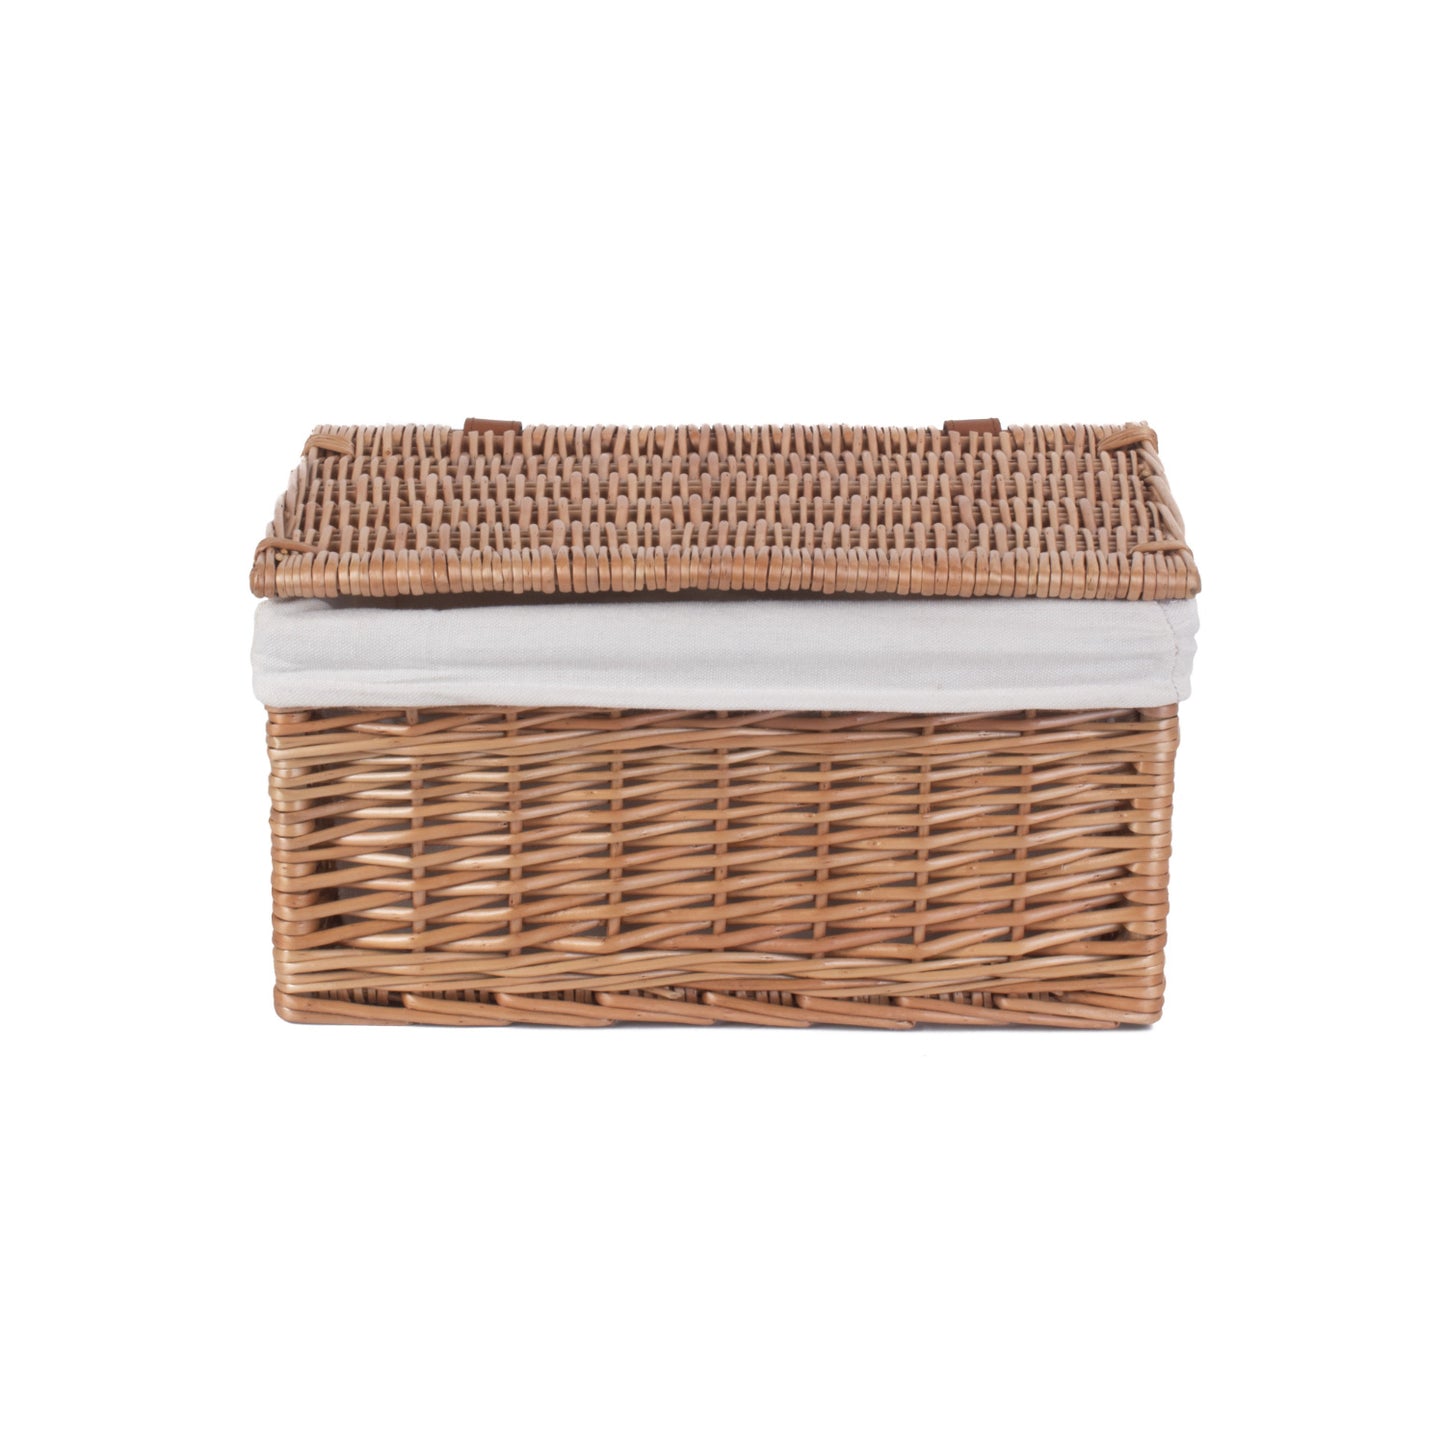 Medium Double Steamed Storage Hamper With White Lining